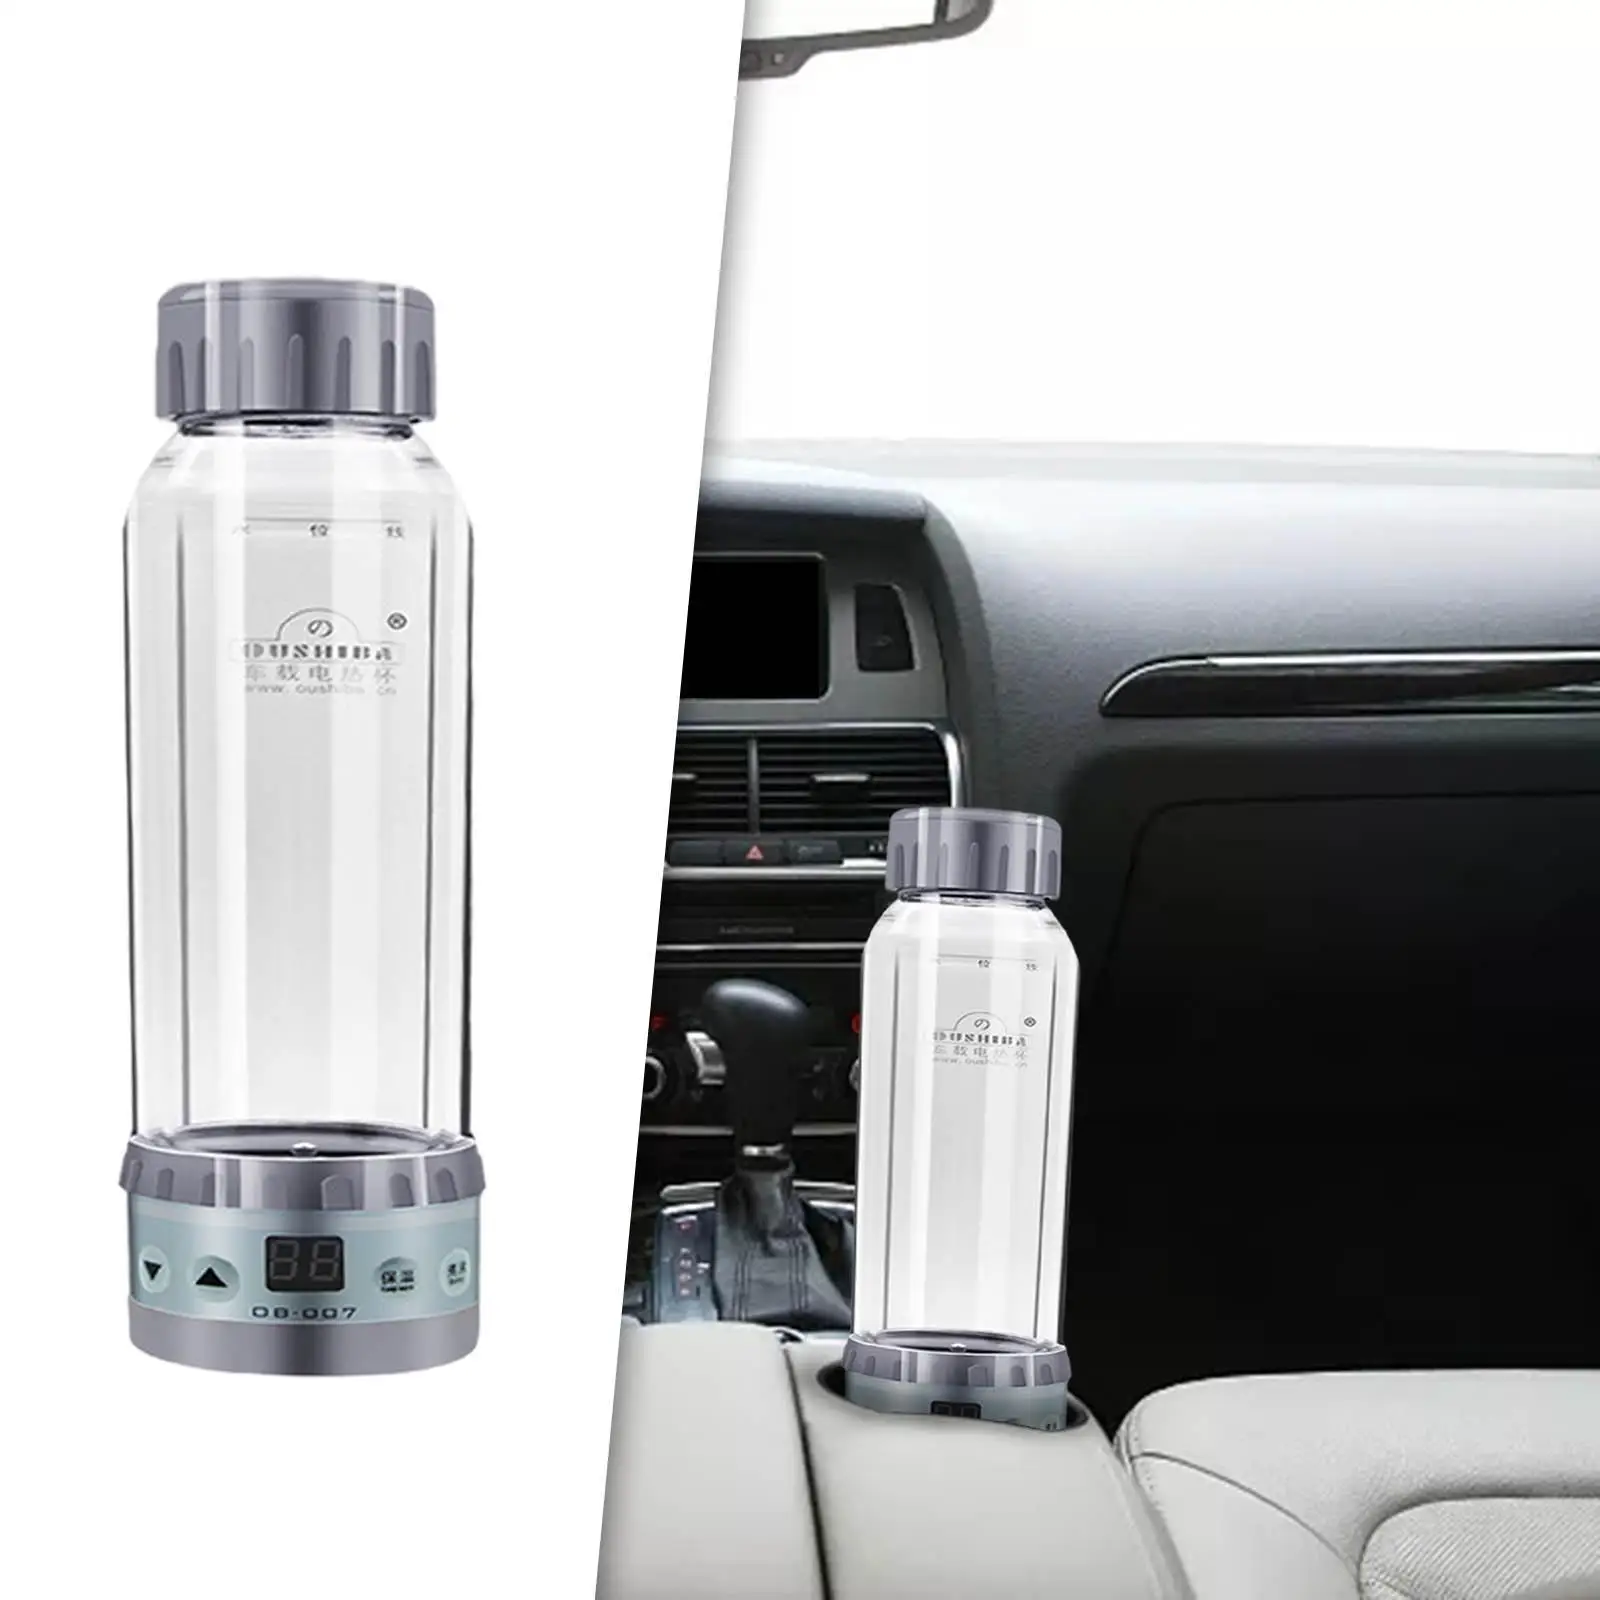 Car Kettle Boiler Double Layer Prevent Lroning Hot Water Kettle Mug for Tea Coffee Water